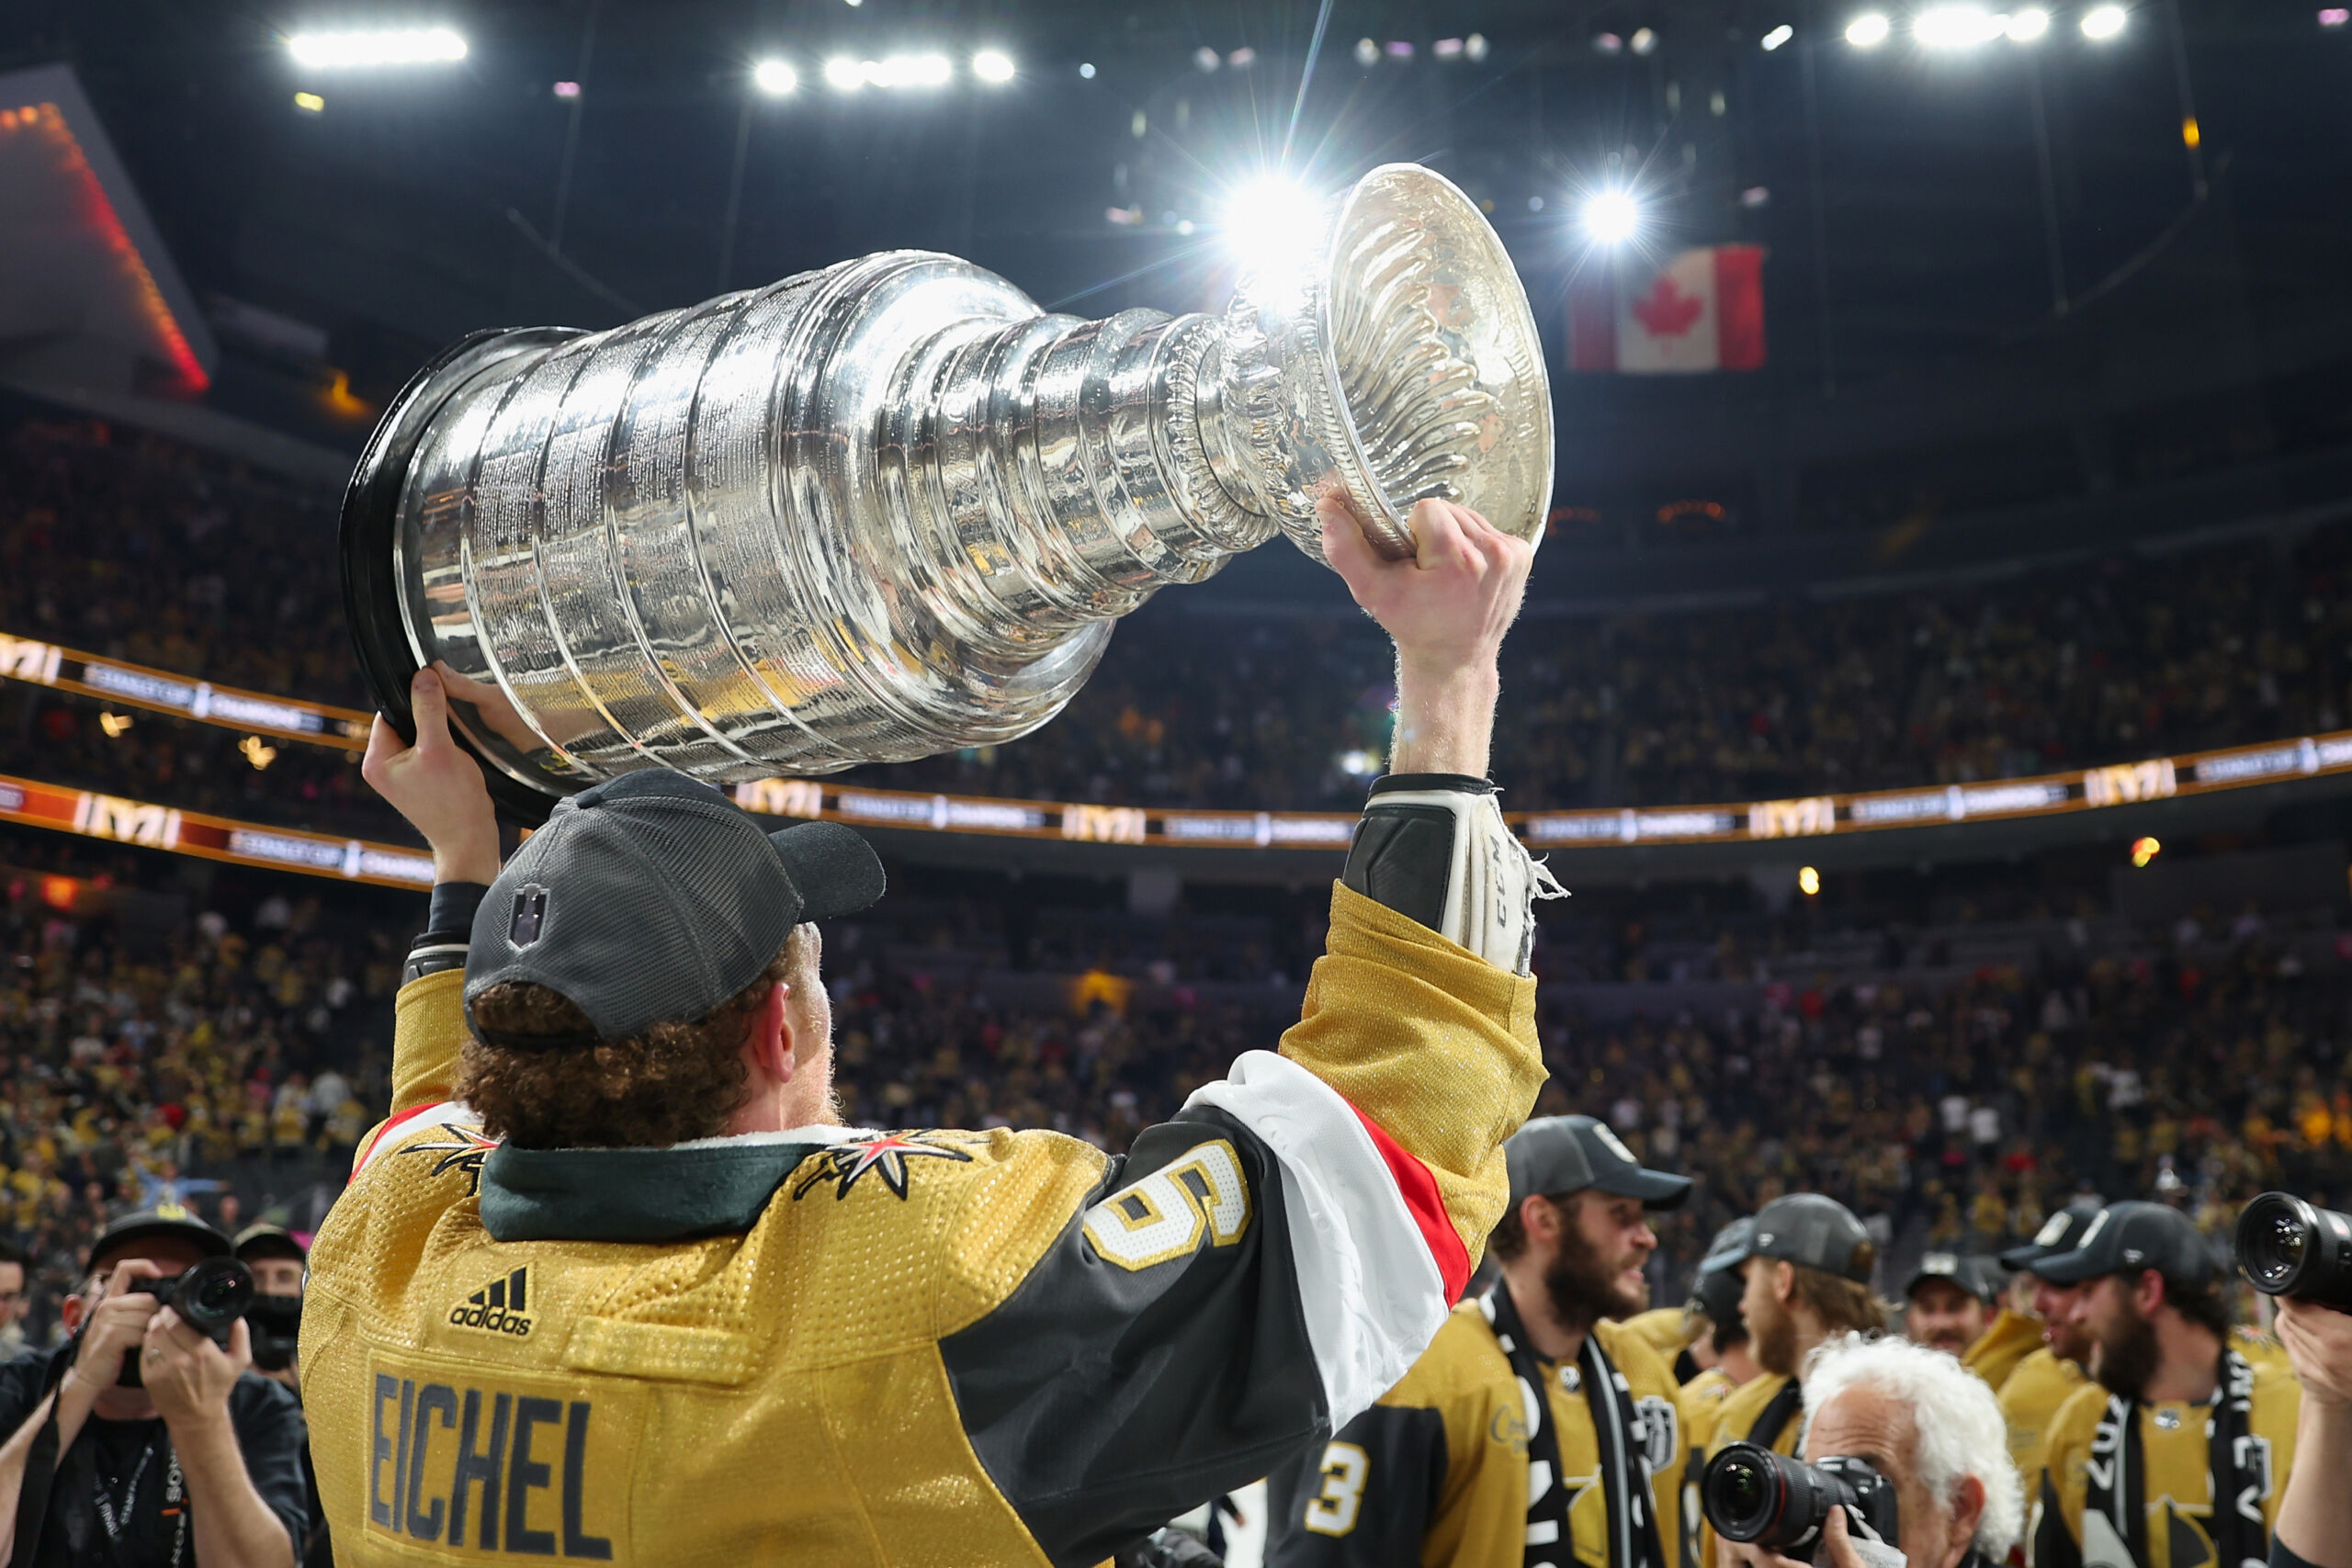 From goaltending to drafting, the successful 2022 Stanley Cup run